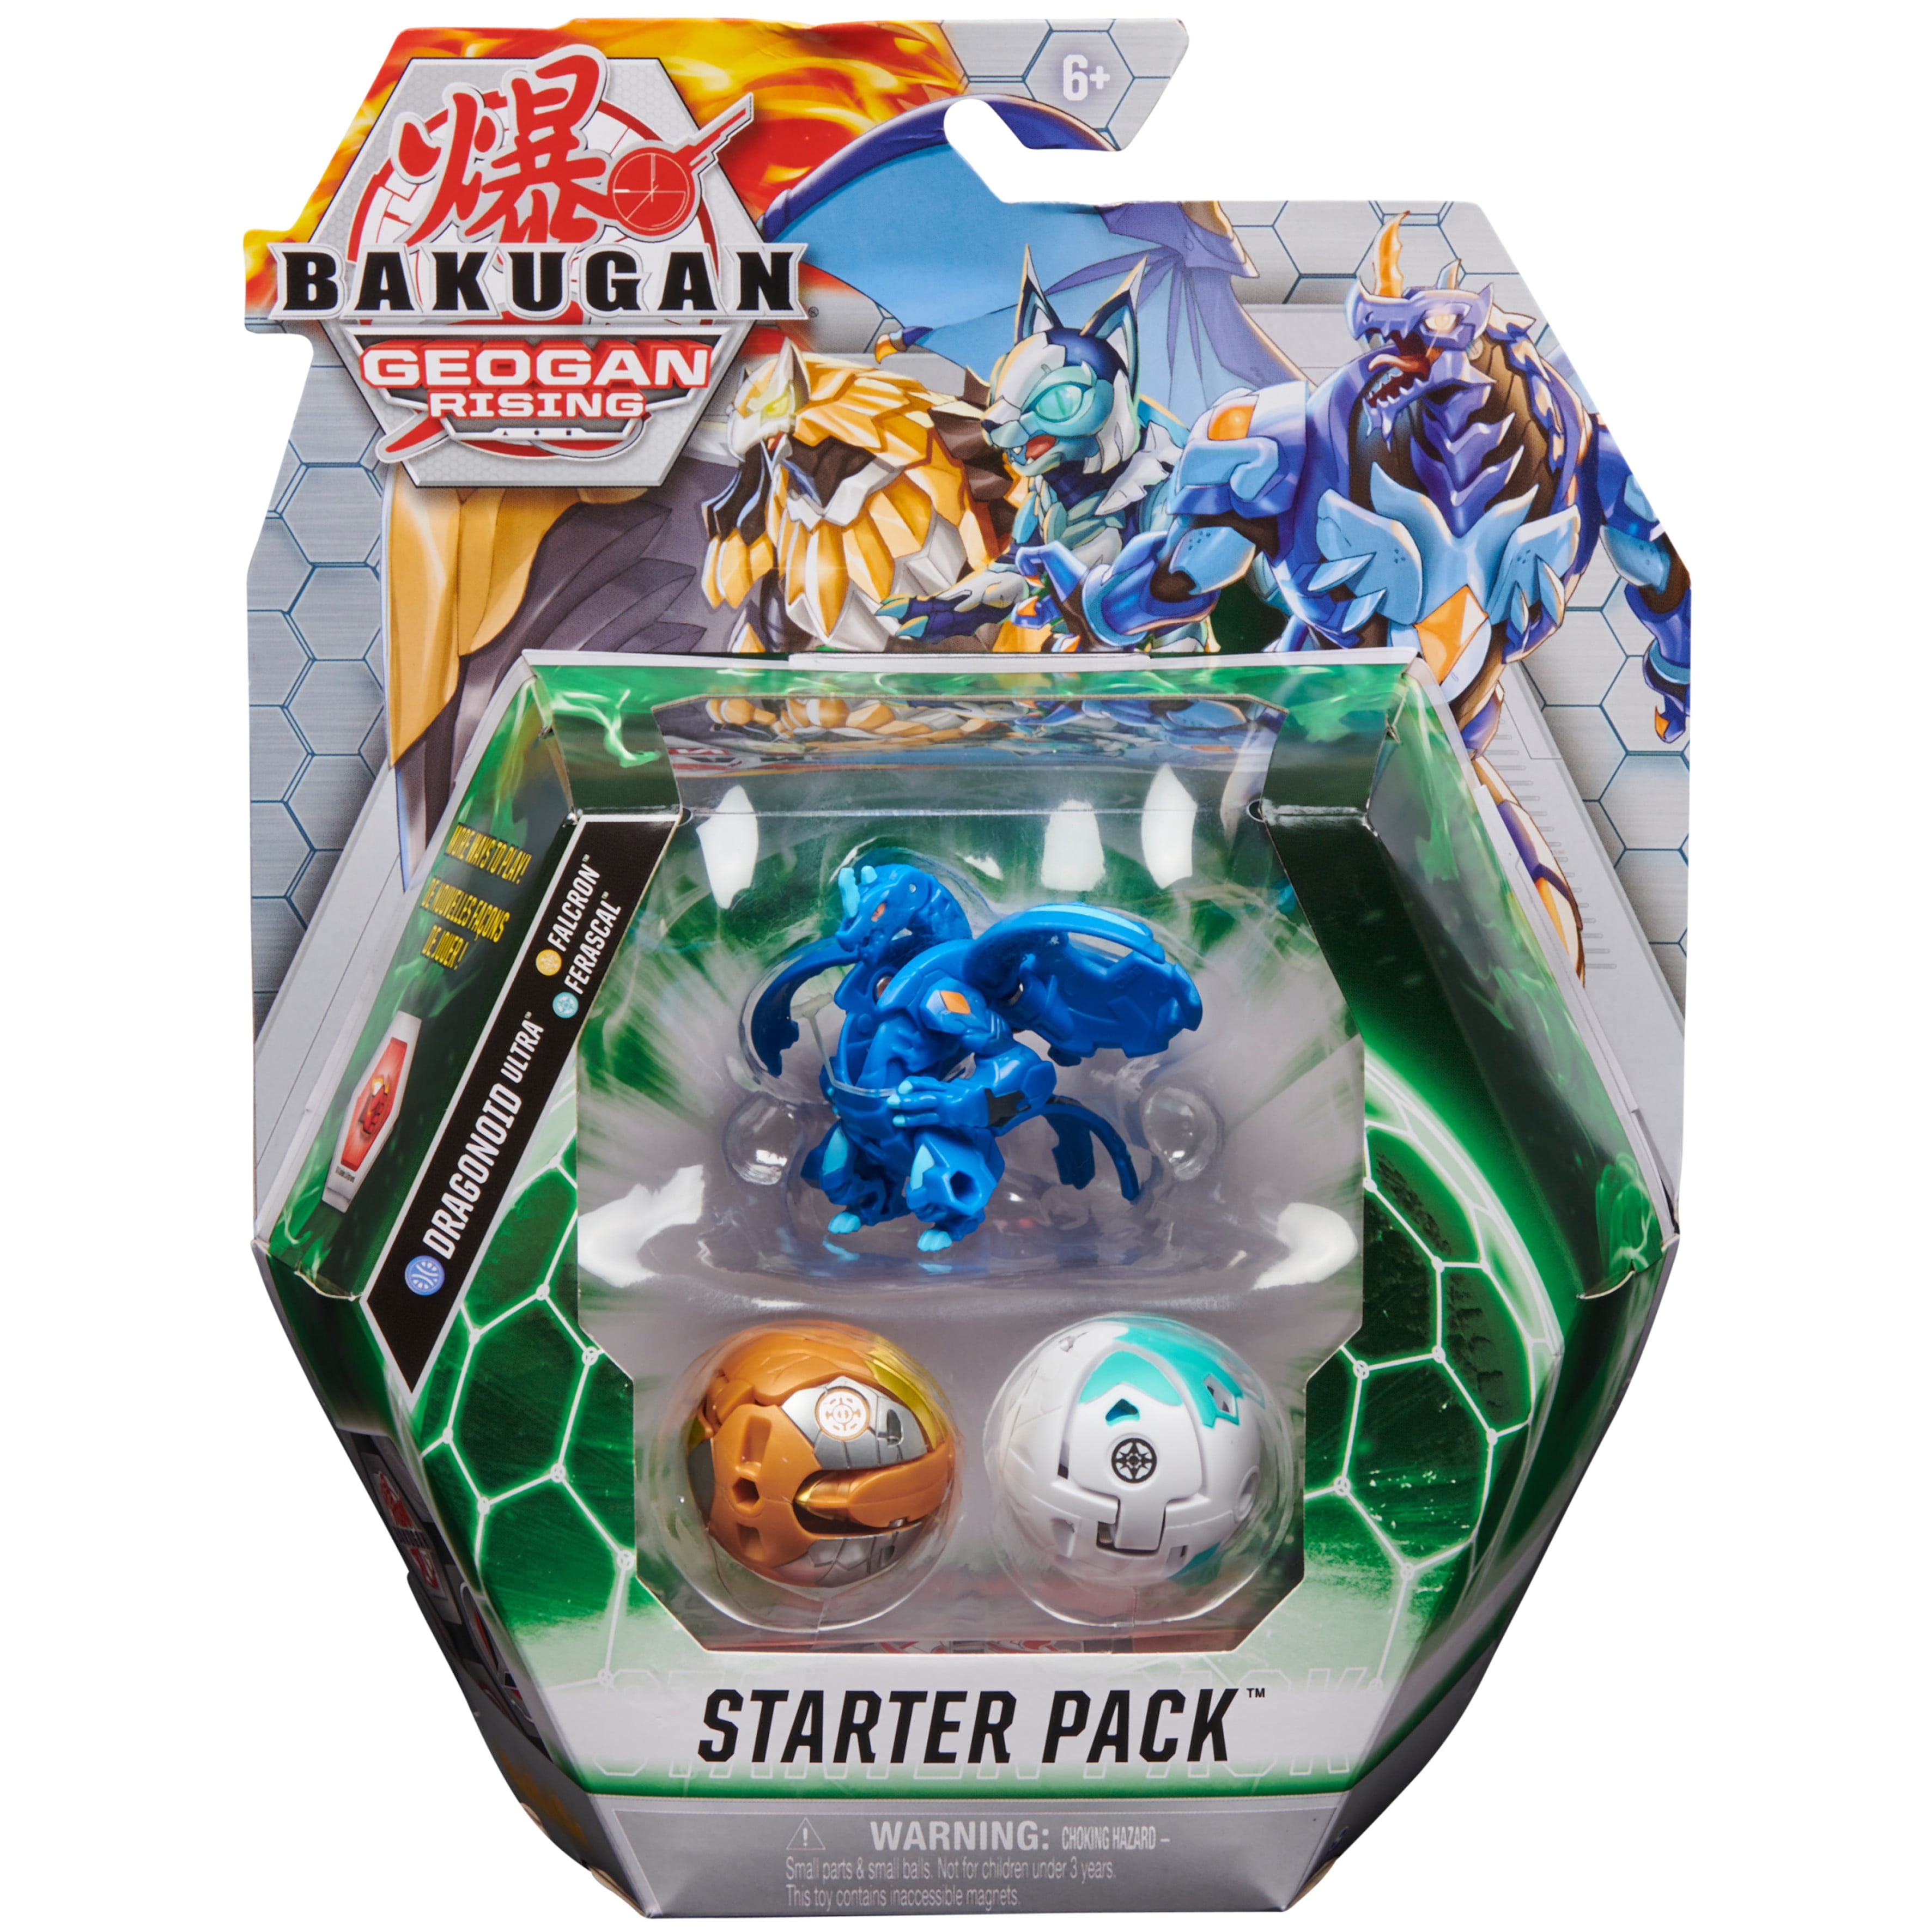 Guinness flyde over at lege Bakugan Starter Pack 3-Pack, Dragonoid Ultra, Geogan Rising Collectible  Action Figures - Walmart.com